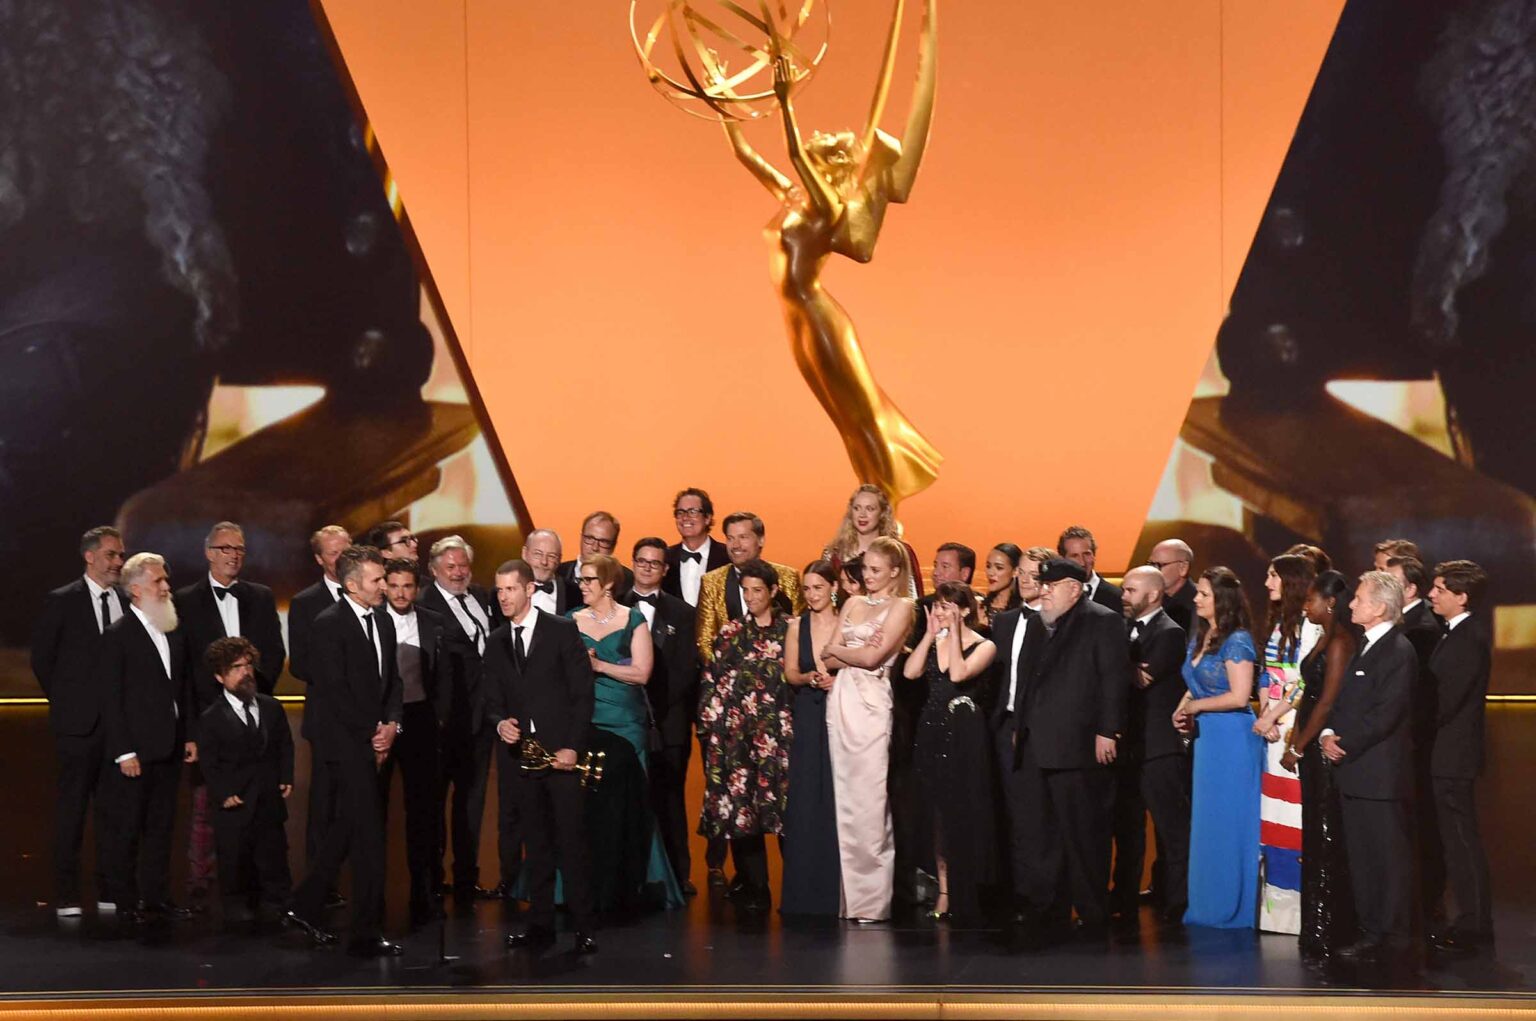 The Emmy Awards announced more room for nominees in their 2020 ceremony, but that won't change the fact the award show is completely irrelevant.